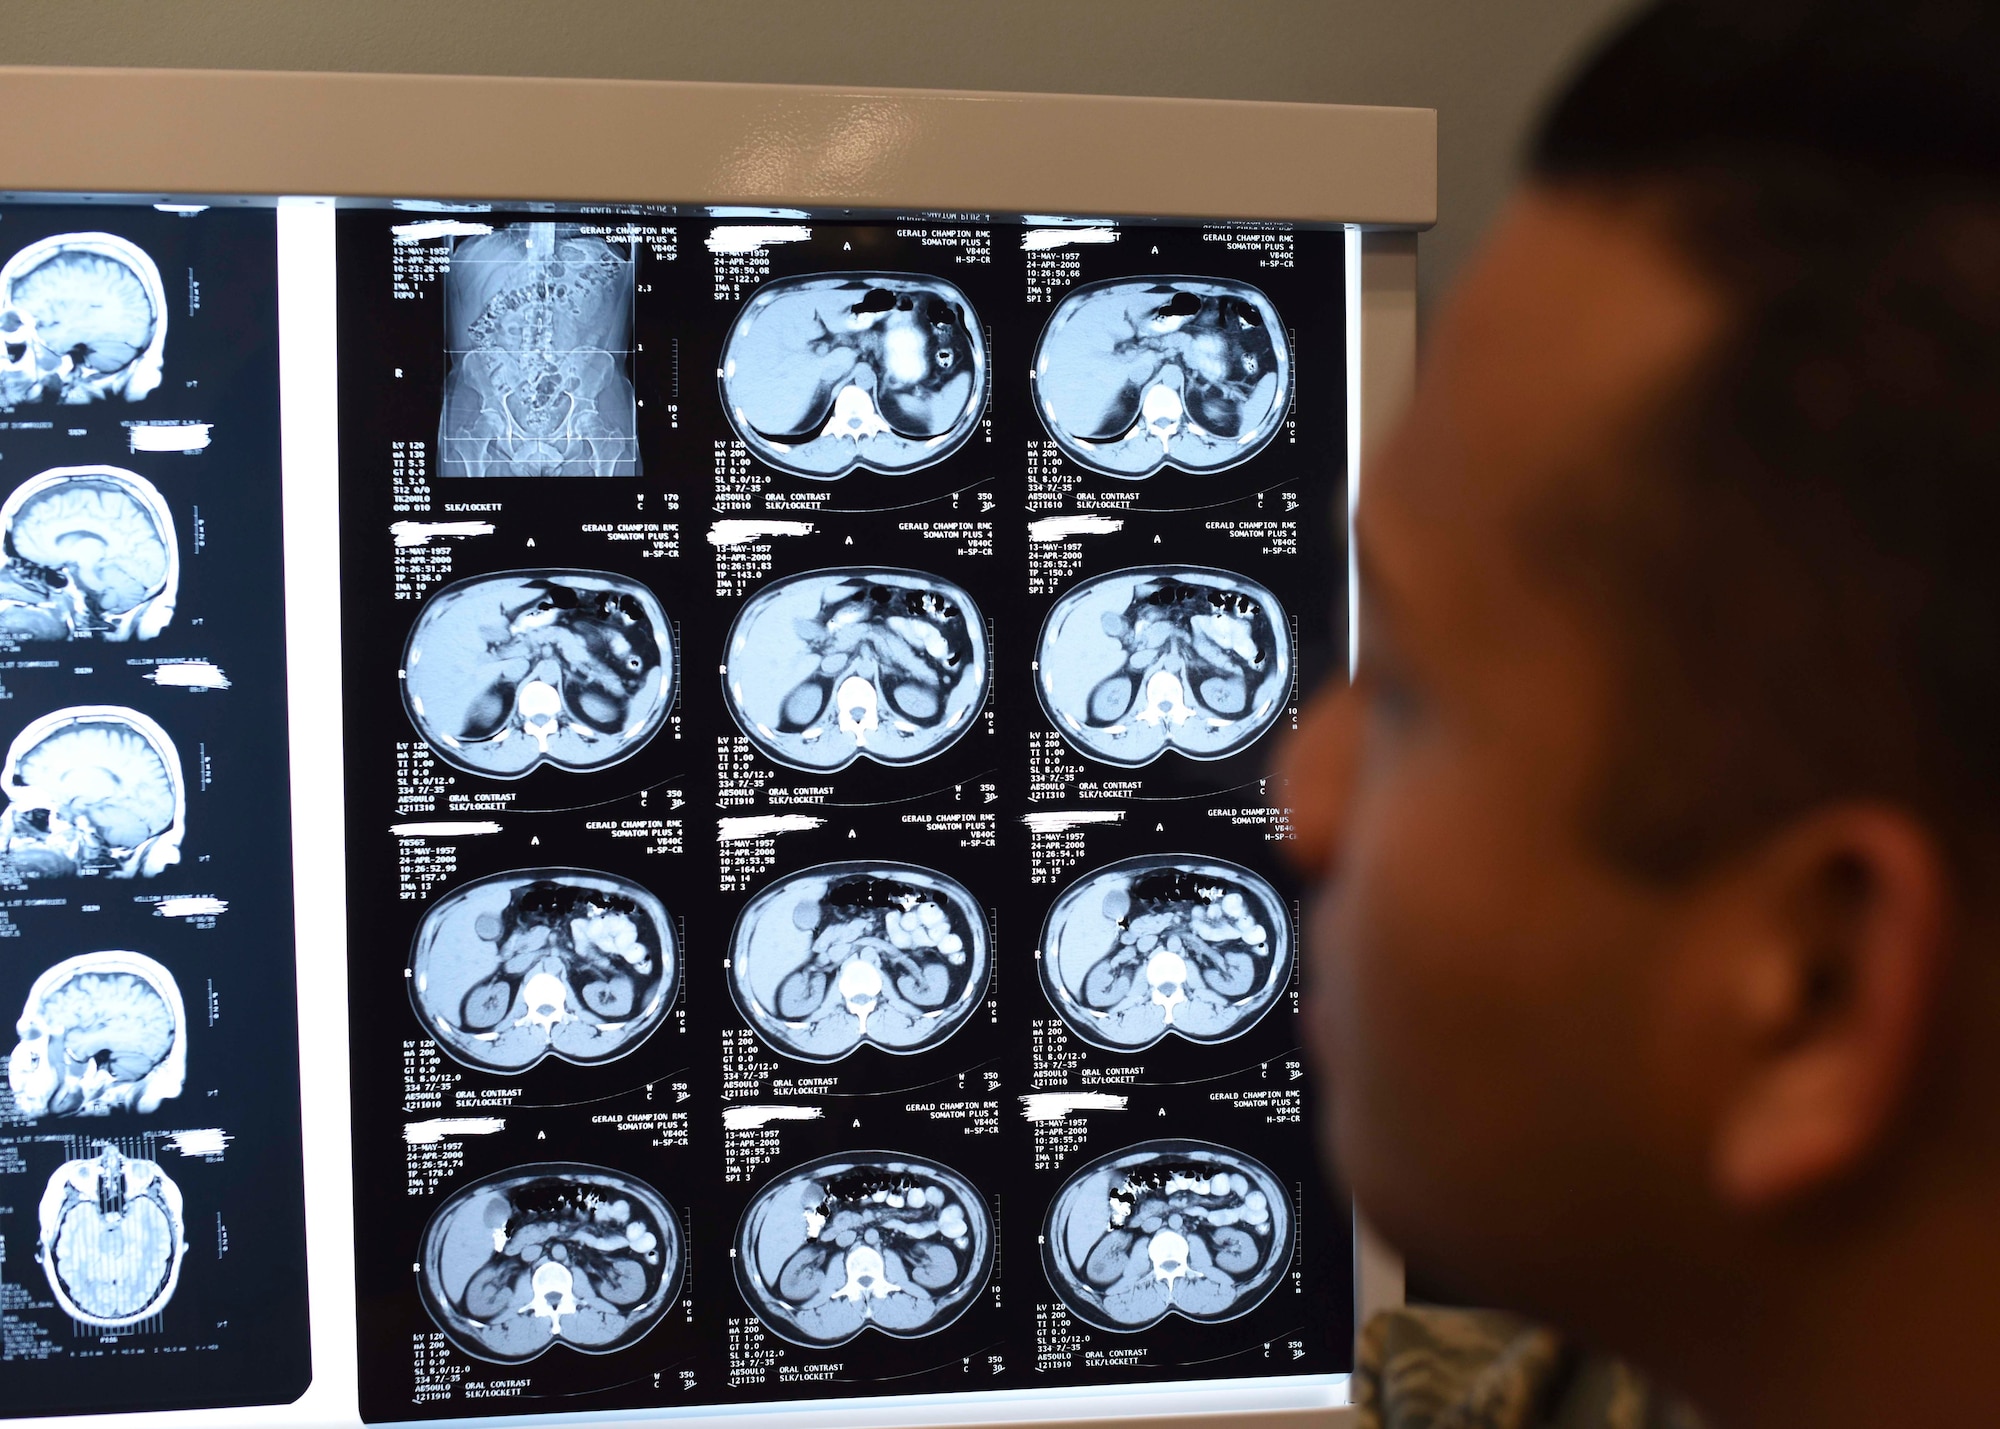 Staff Sgt. Englebert Delena, 49th Medical Group diagnostic imaging technologist, analyzes magnetic resonance imaging and computerized tomography prints, Jan. 23, 2019, on Holloman Air Force Base, N.M. The 49th Medical Group’s Radiology Clinic processes up to 2,000 patients annually, and digitally transmits x-ray images to radiologists at Travis Air Force Base, Calif., for diagnosing. (U.S. Air Force photo by Staff Sgt. BreeAnn Sachs)